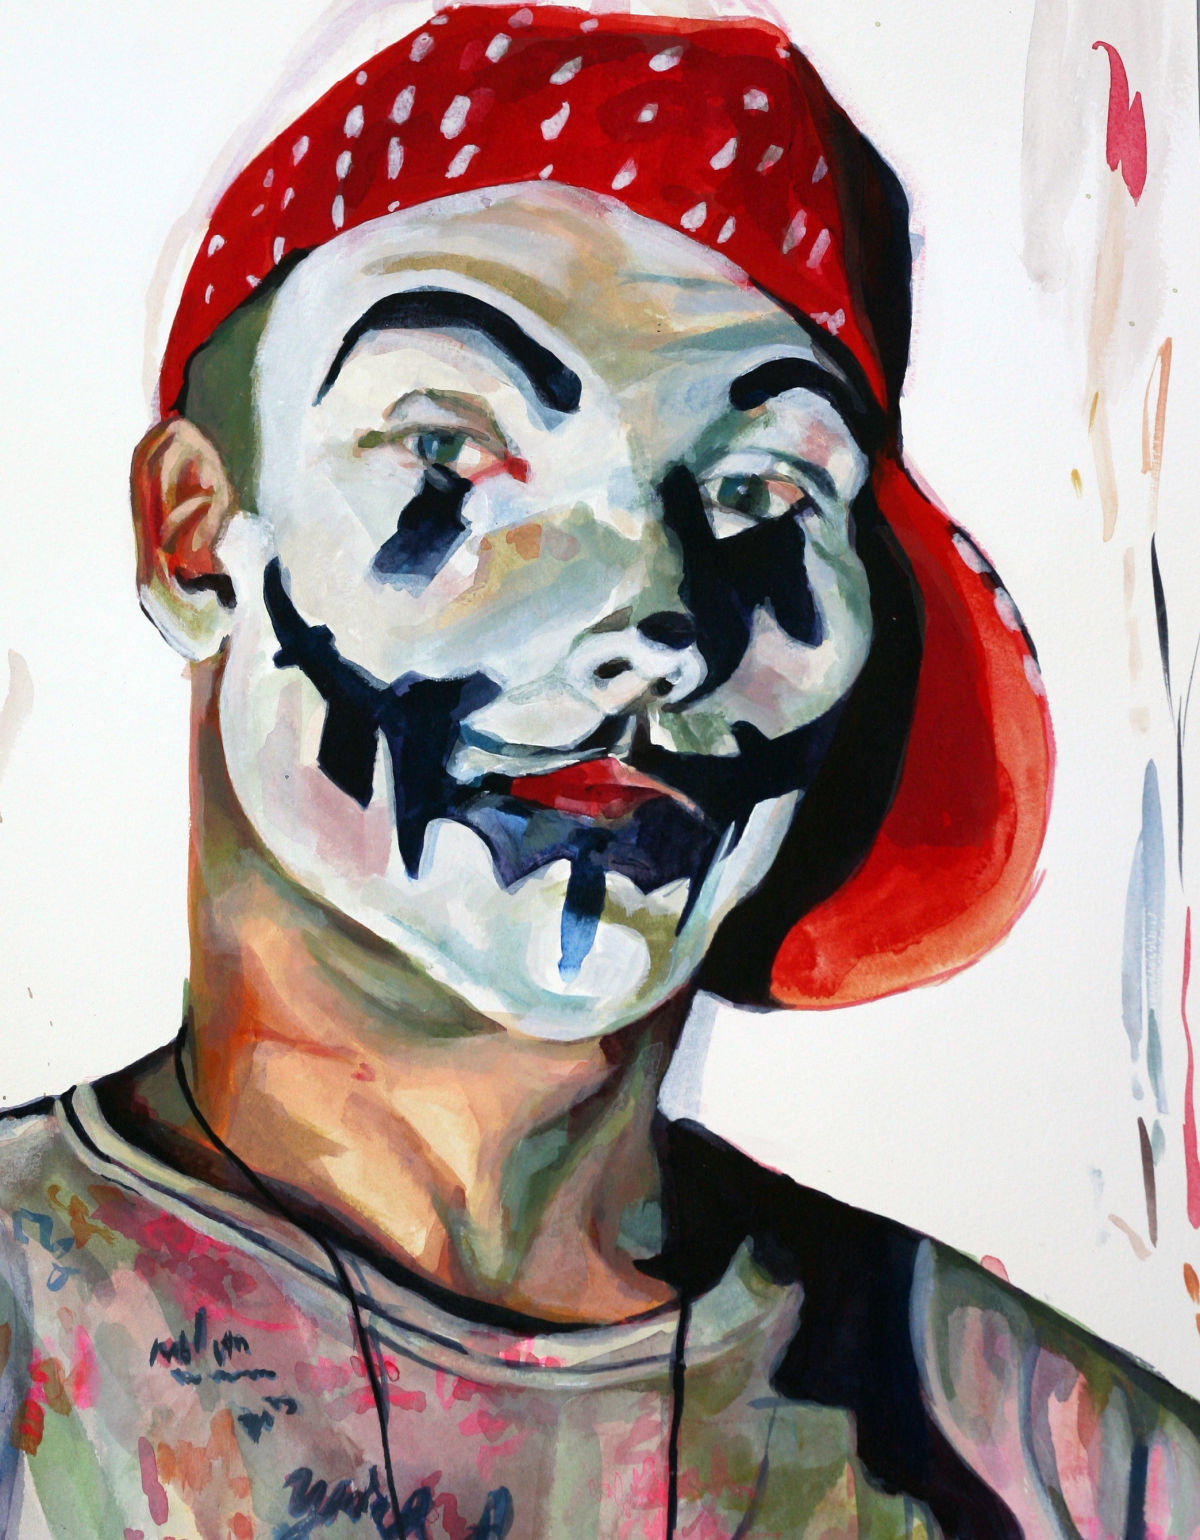 The Weirdly Beautiful Story Behind The First Ever Juggalo Art Exhibit